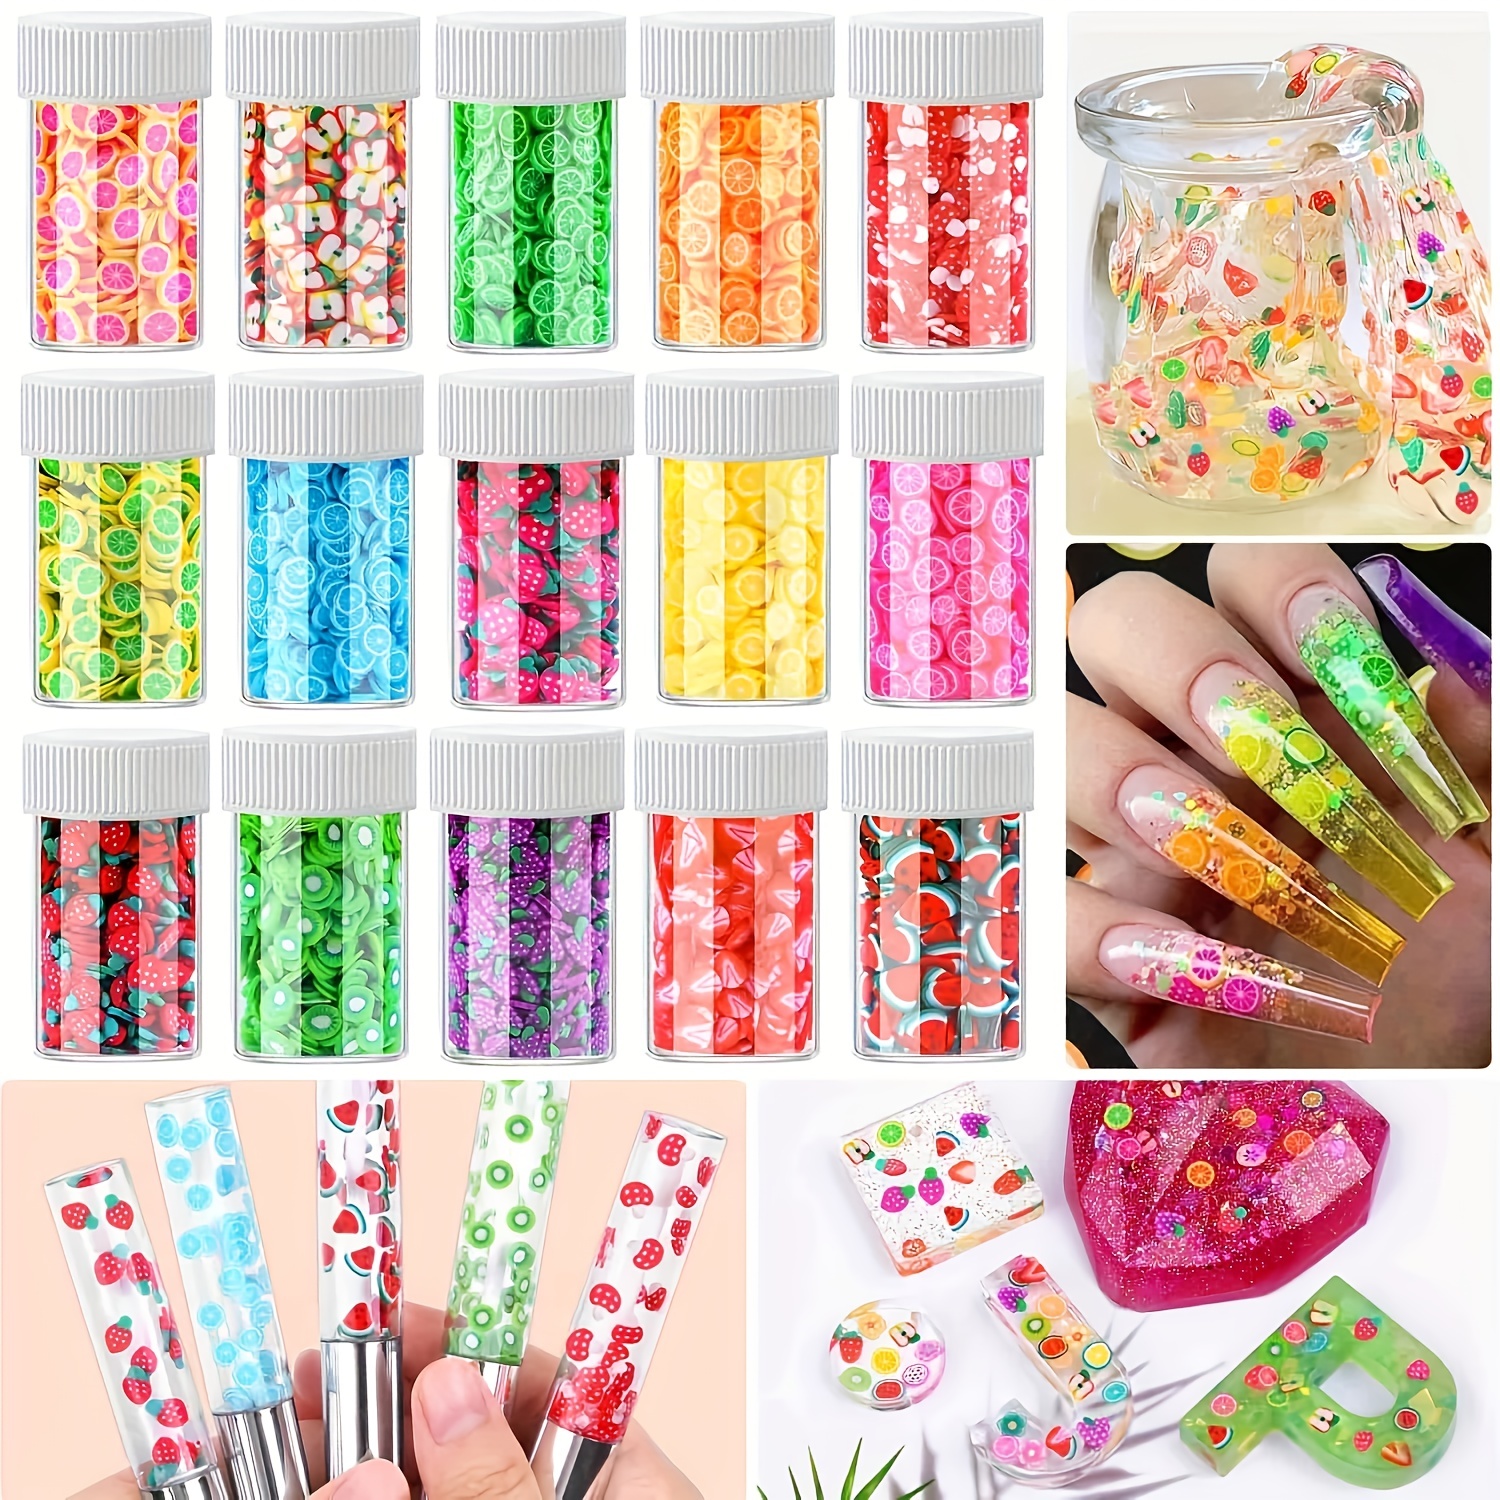 Resin Gumballs, Slime add ins, Nail Art Supplies, Shaker Crafts, Deco Whip  Toppings Craft Supplies